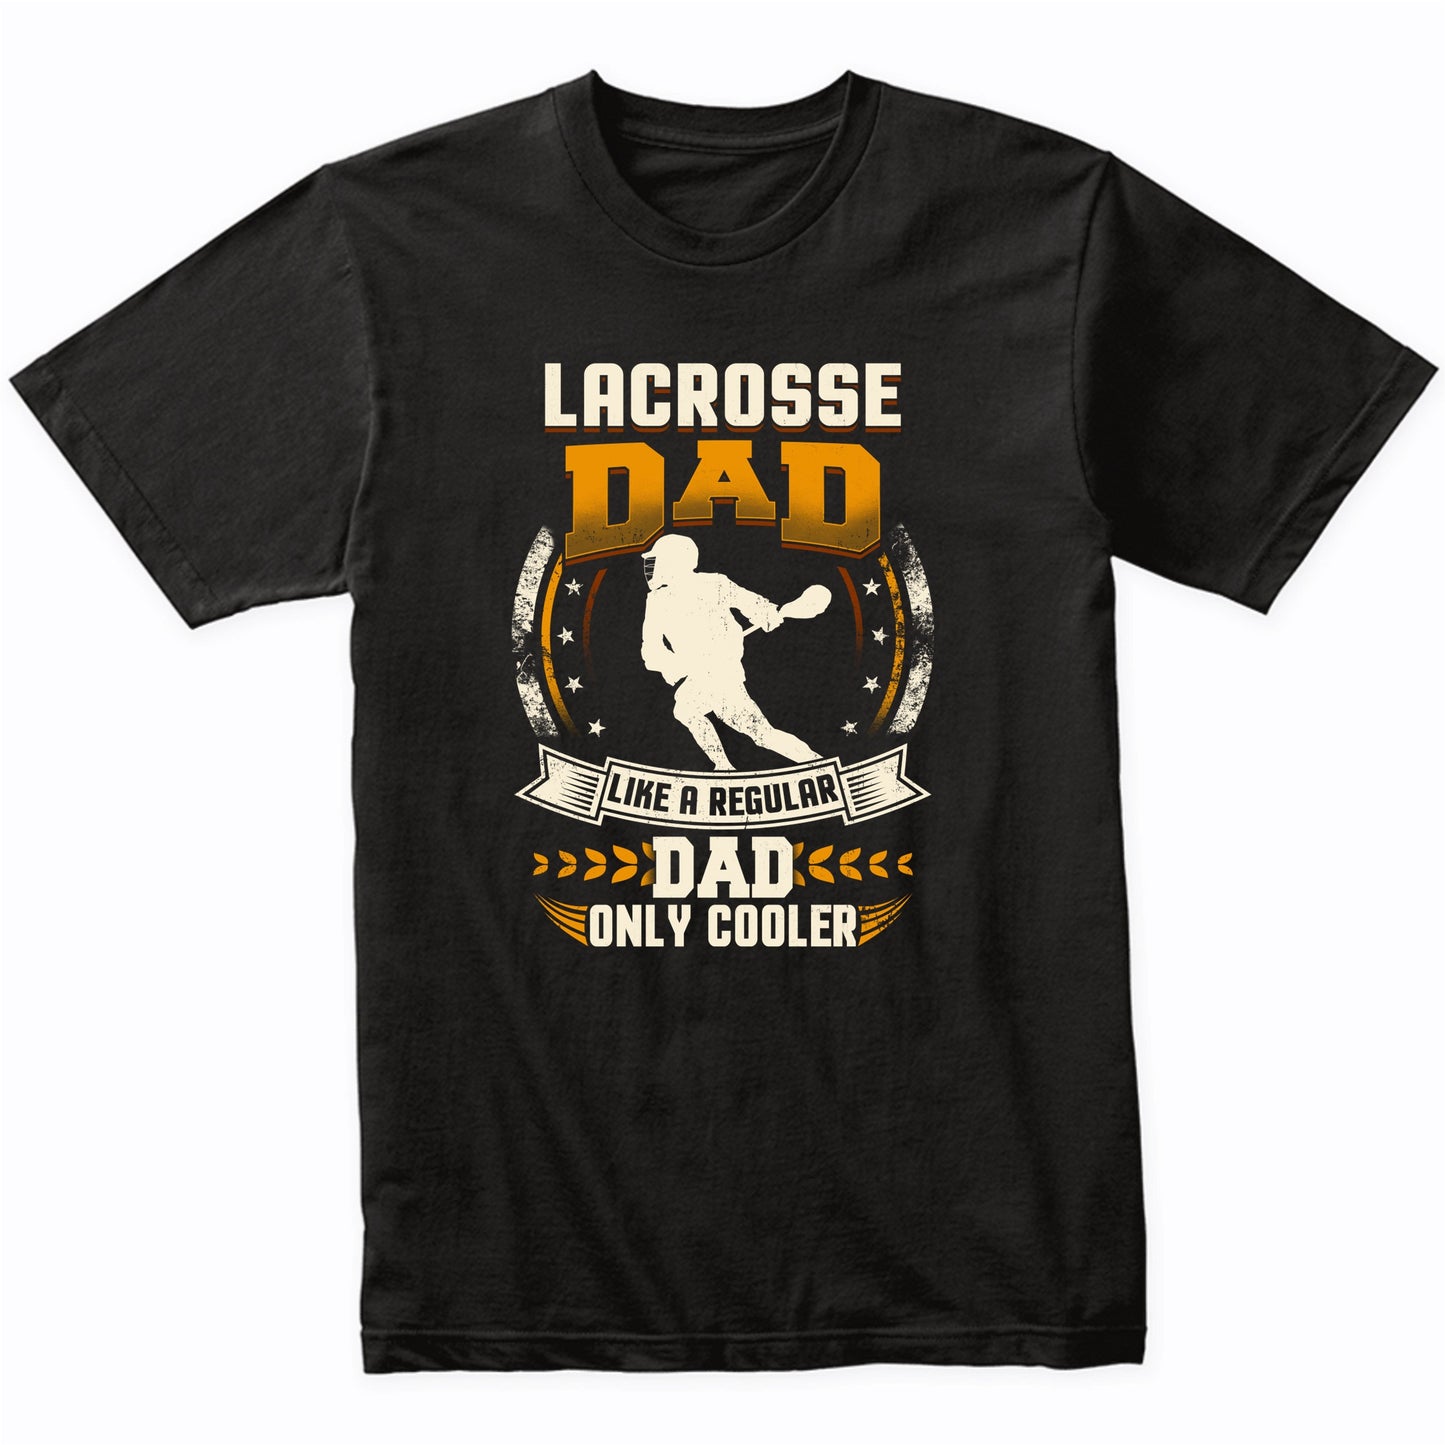 Lacrosse Dad Like A Regular Dad Only Cooler Funny T-Shirt